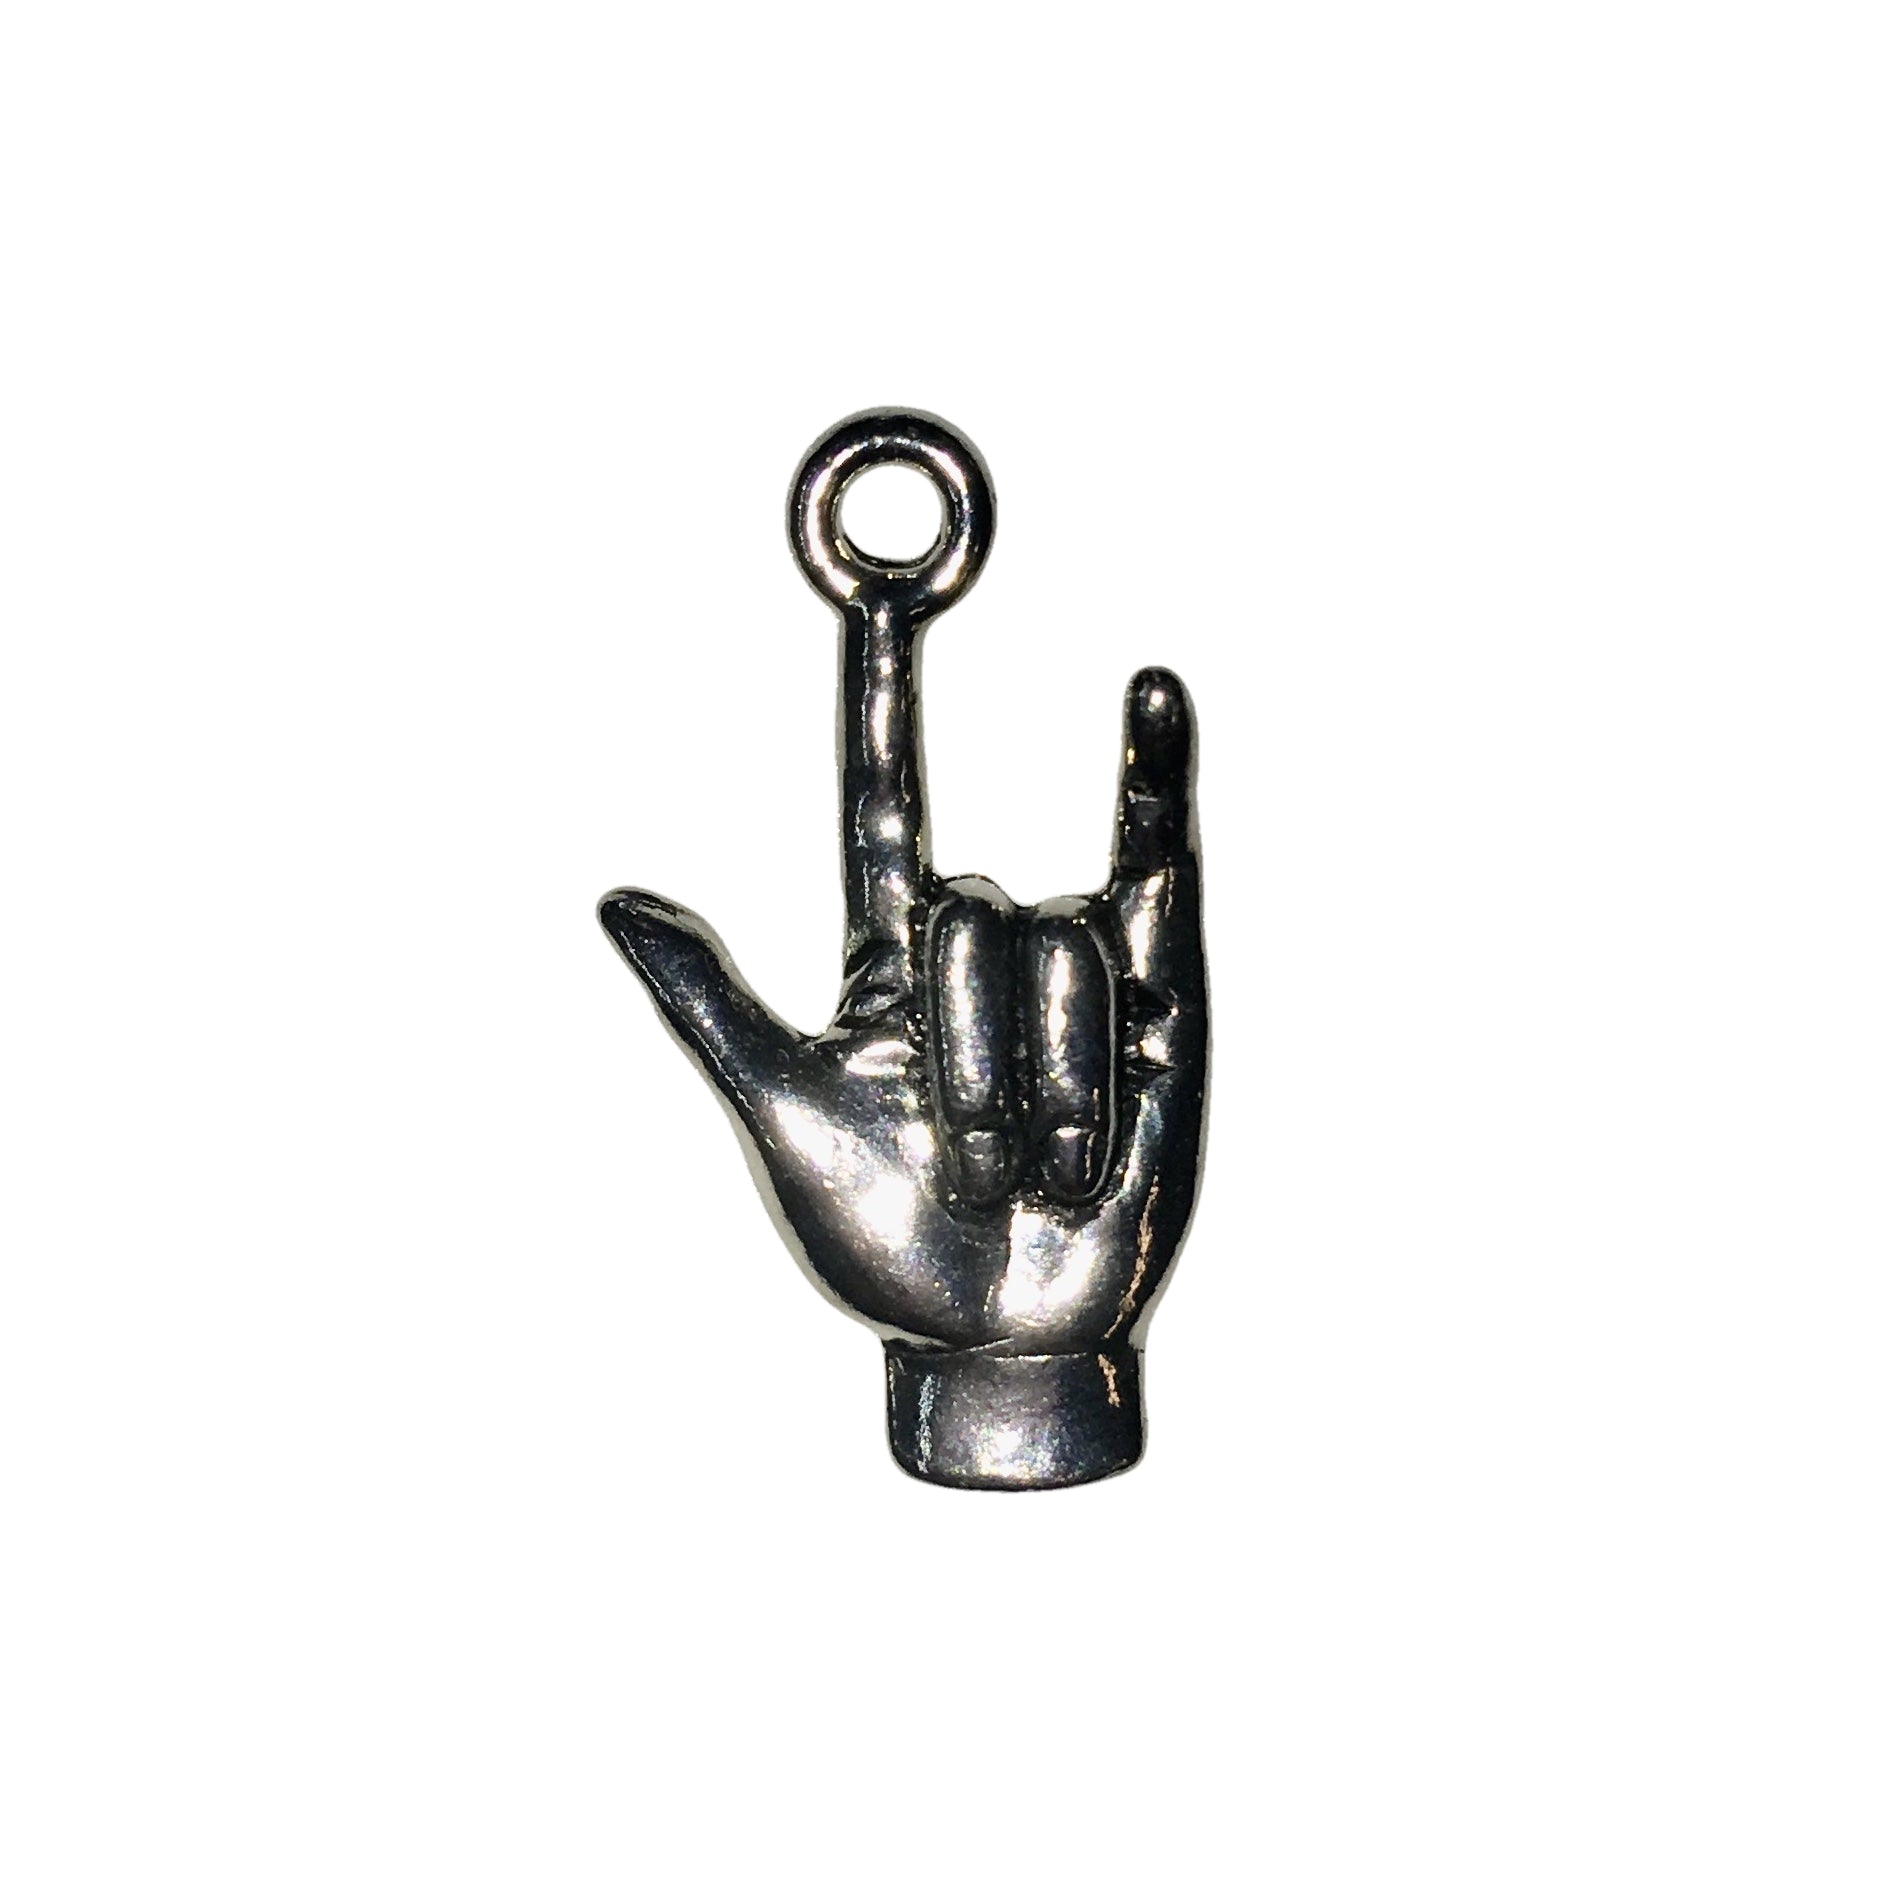 I Love You Hand Sign Charms - Qty 5 - Lead Free Pewter Silver